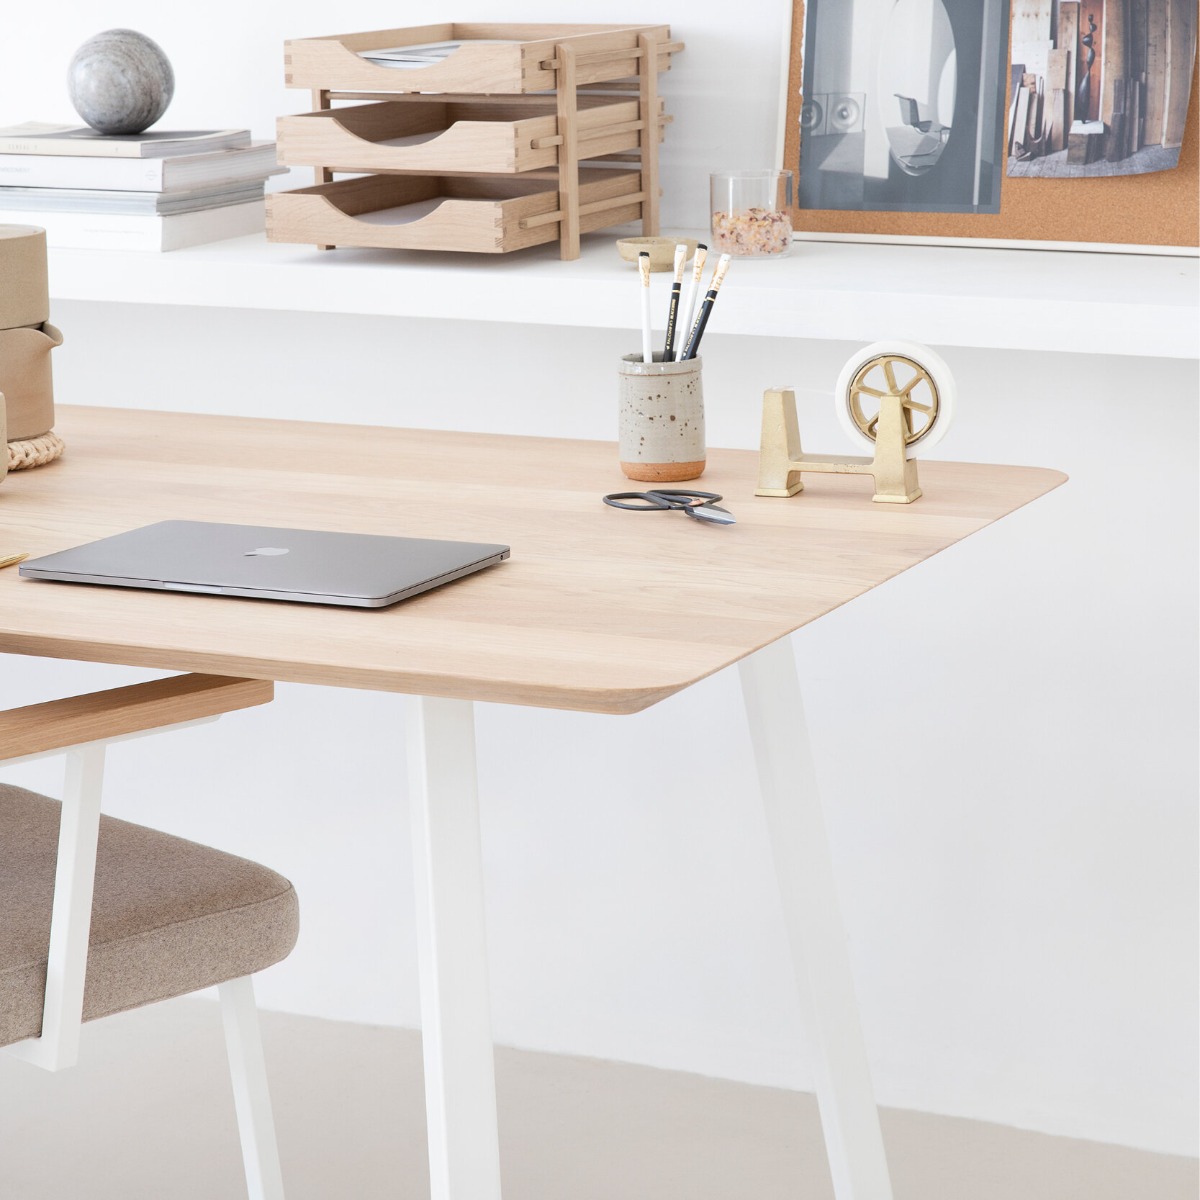 https://www.fundesign.nl/media/catalog/product/n/e/new_perspectives_campaign-home_desk-new_classic-studio_henk-03_9.jpg